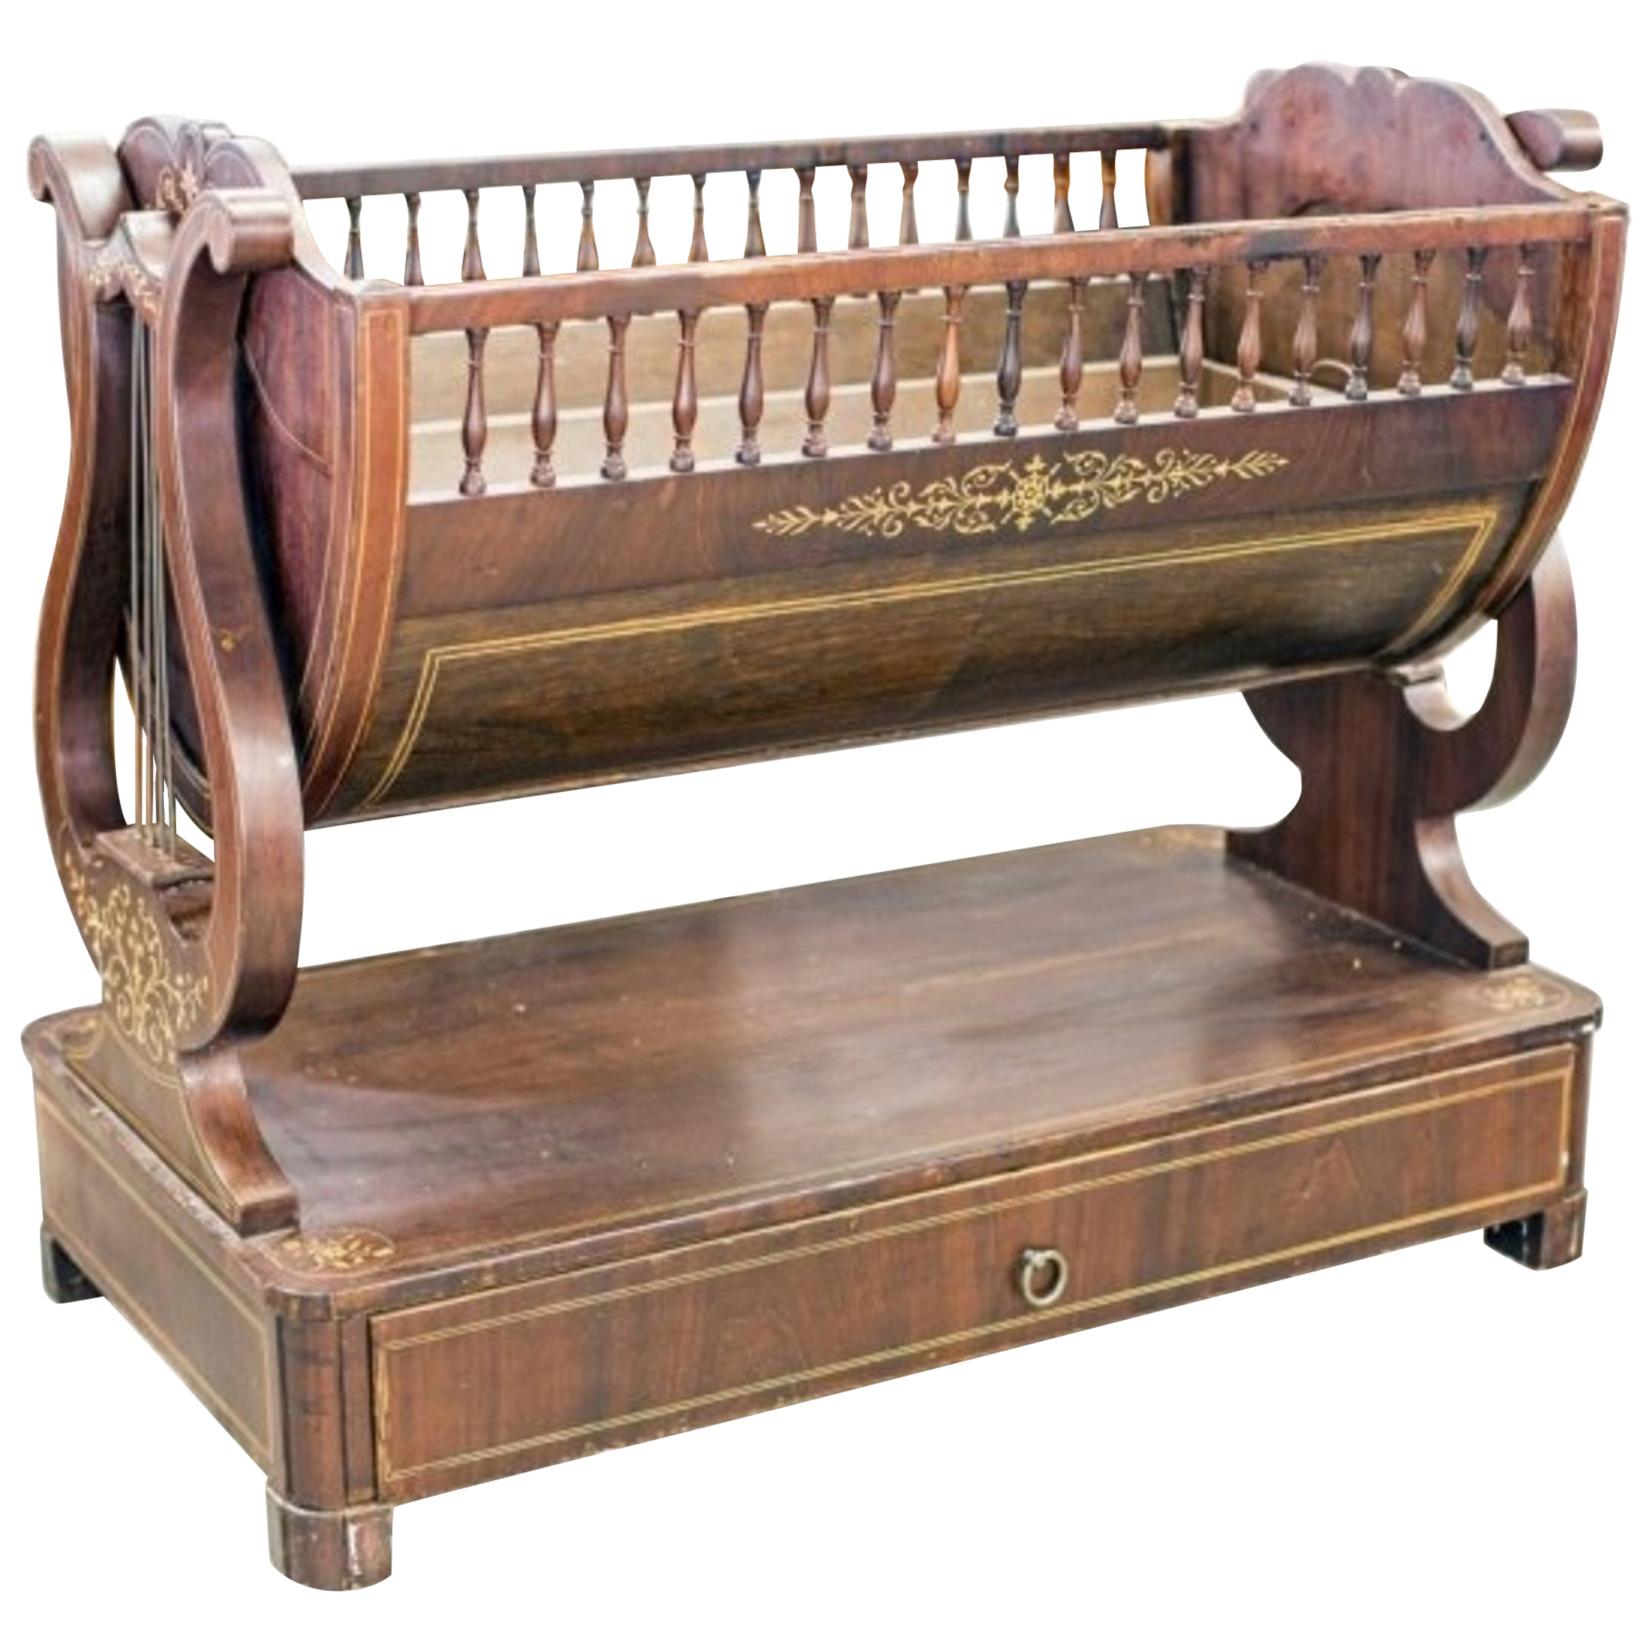 Mahogany Cradle, Louis Philippe or North European Neoclassical, Mid-19th Century For Sale